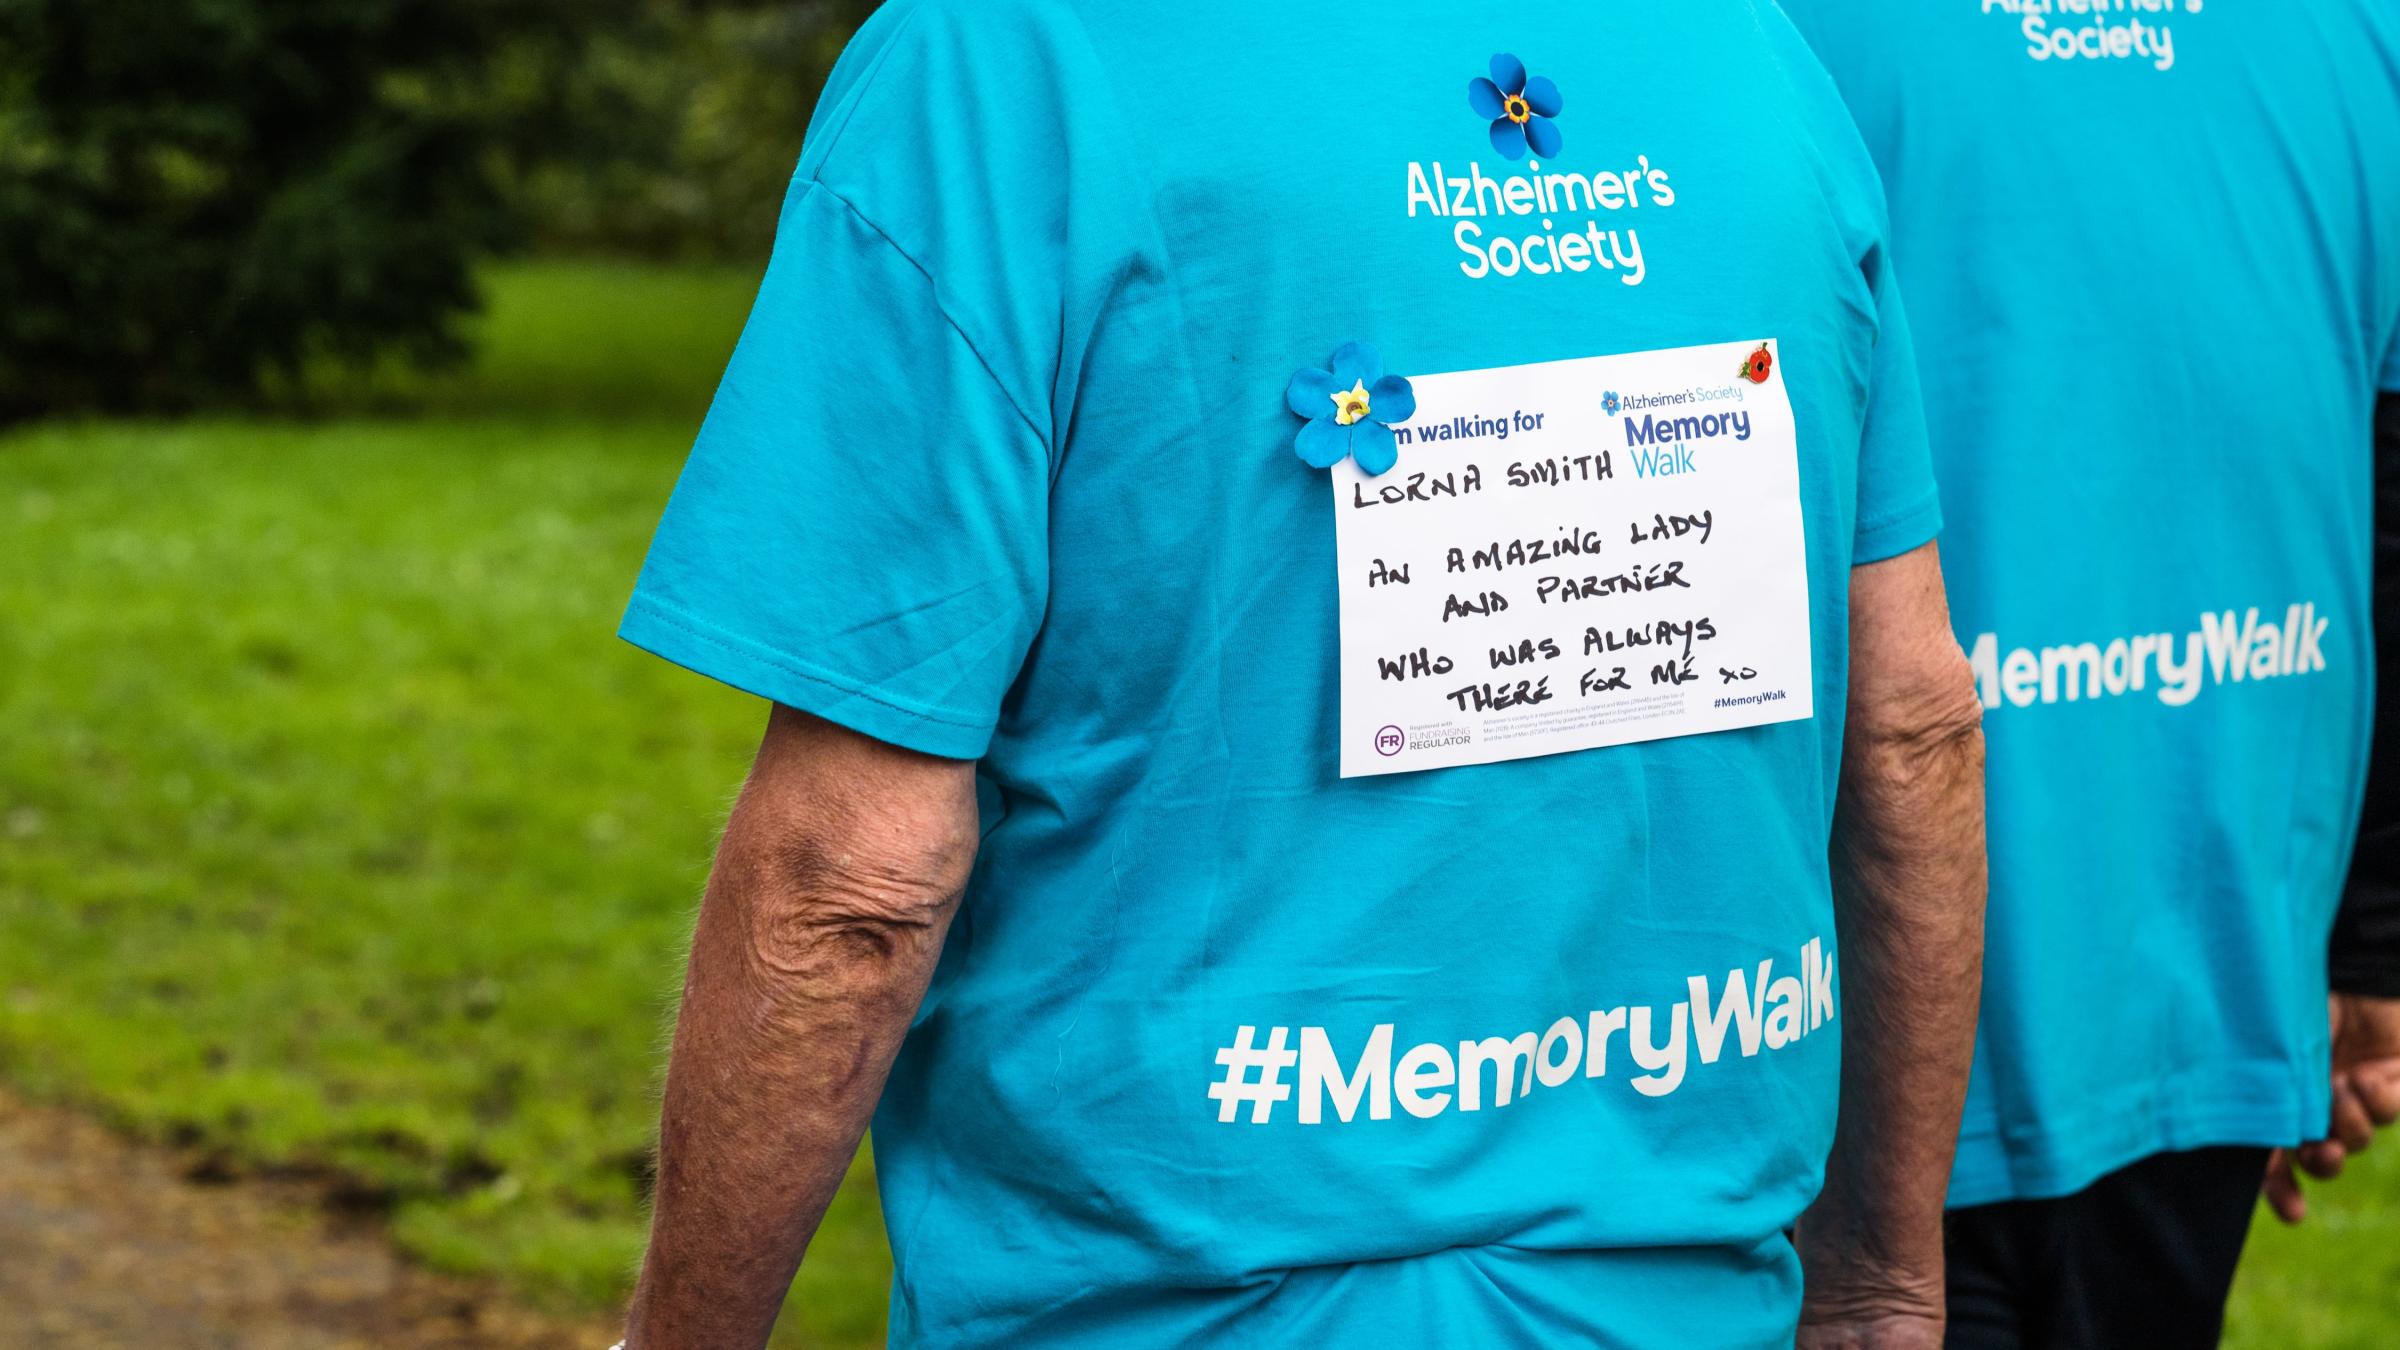 'In Memory' sign on back of t-shirt